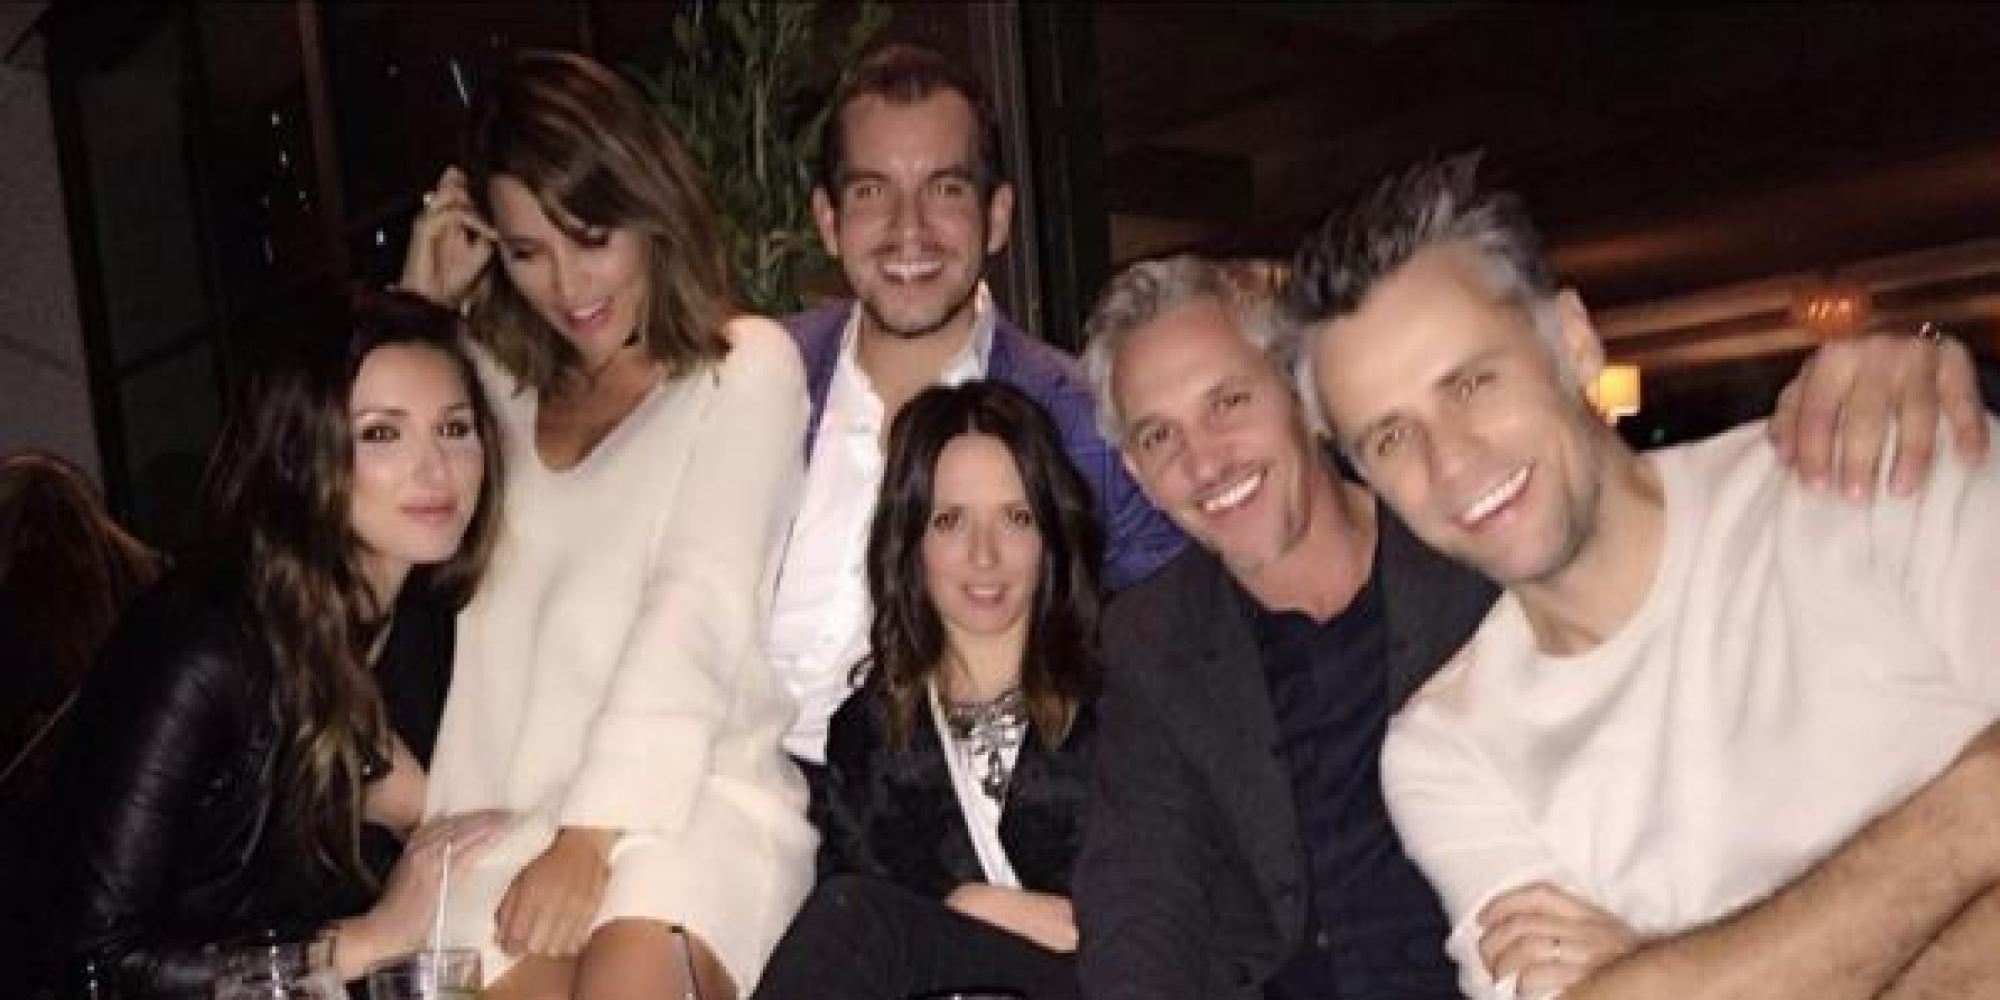 Gary Lineker Holidays With Ex Wife Danielle Bux Just Weeks After 